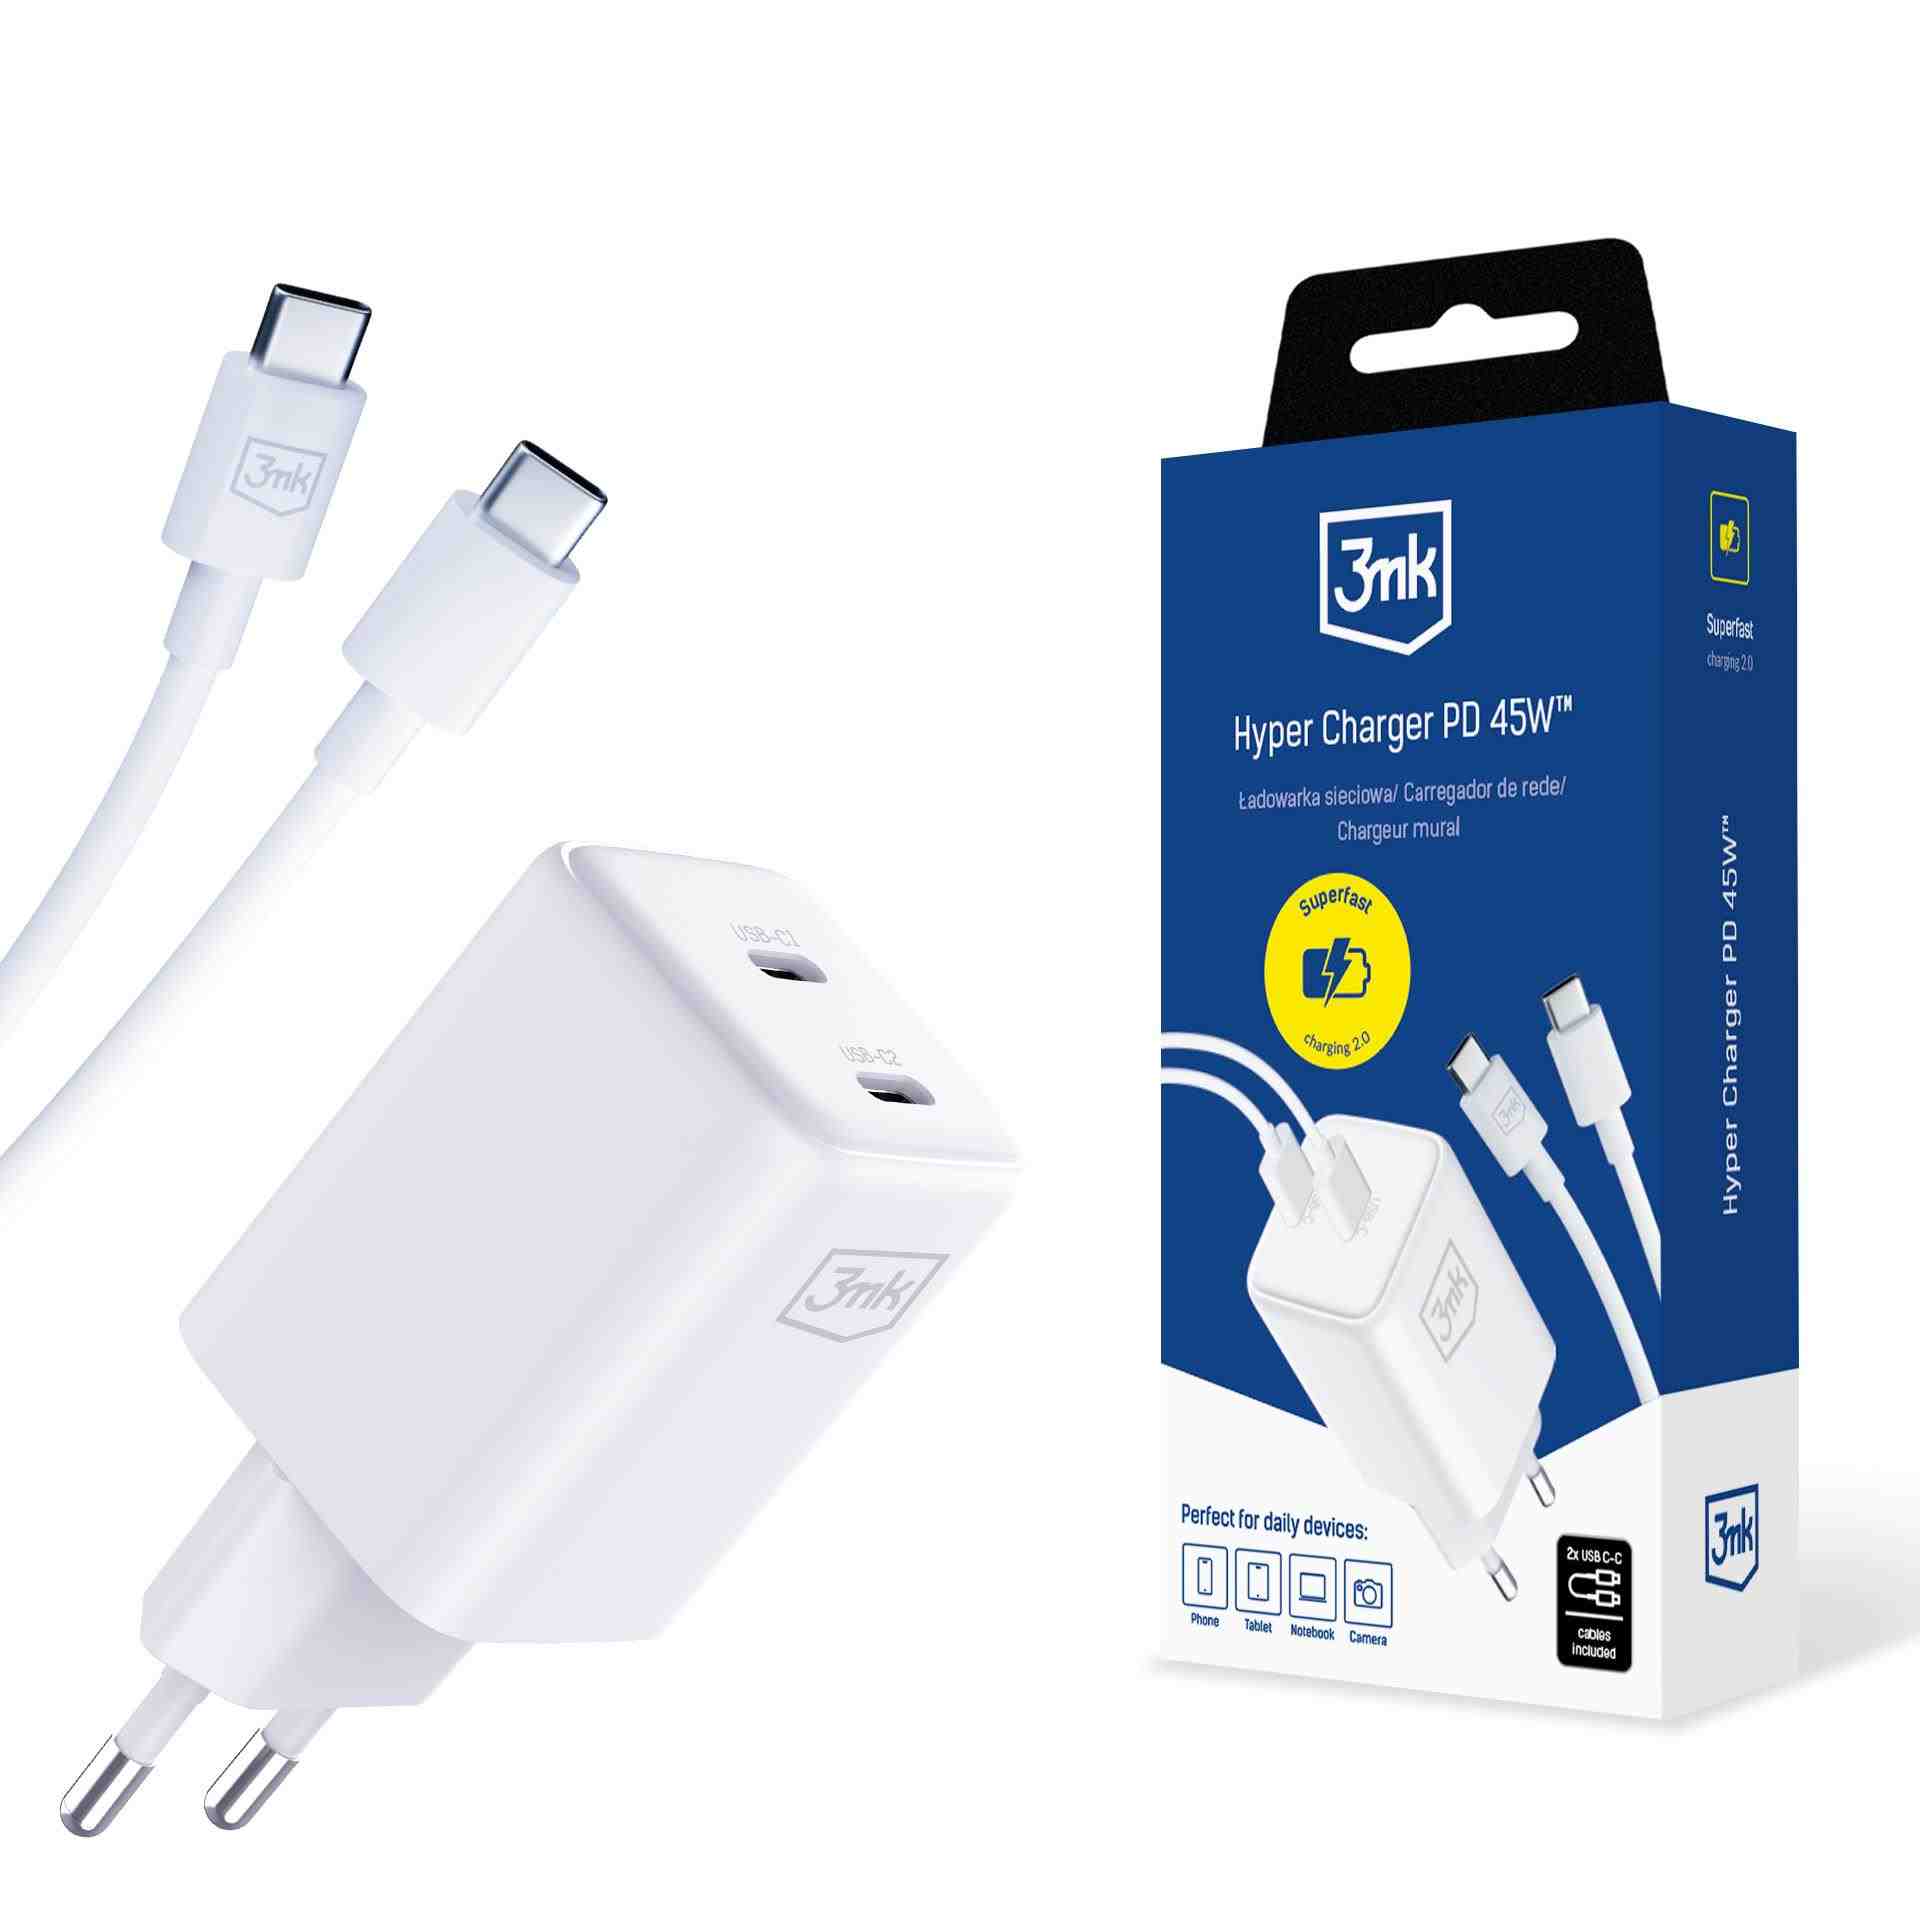 3mk Hyper Charger PD 45W+USB Cable C to C White0 